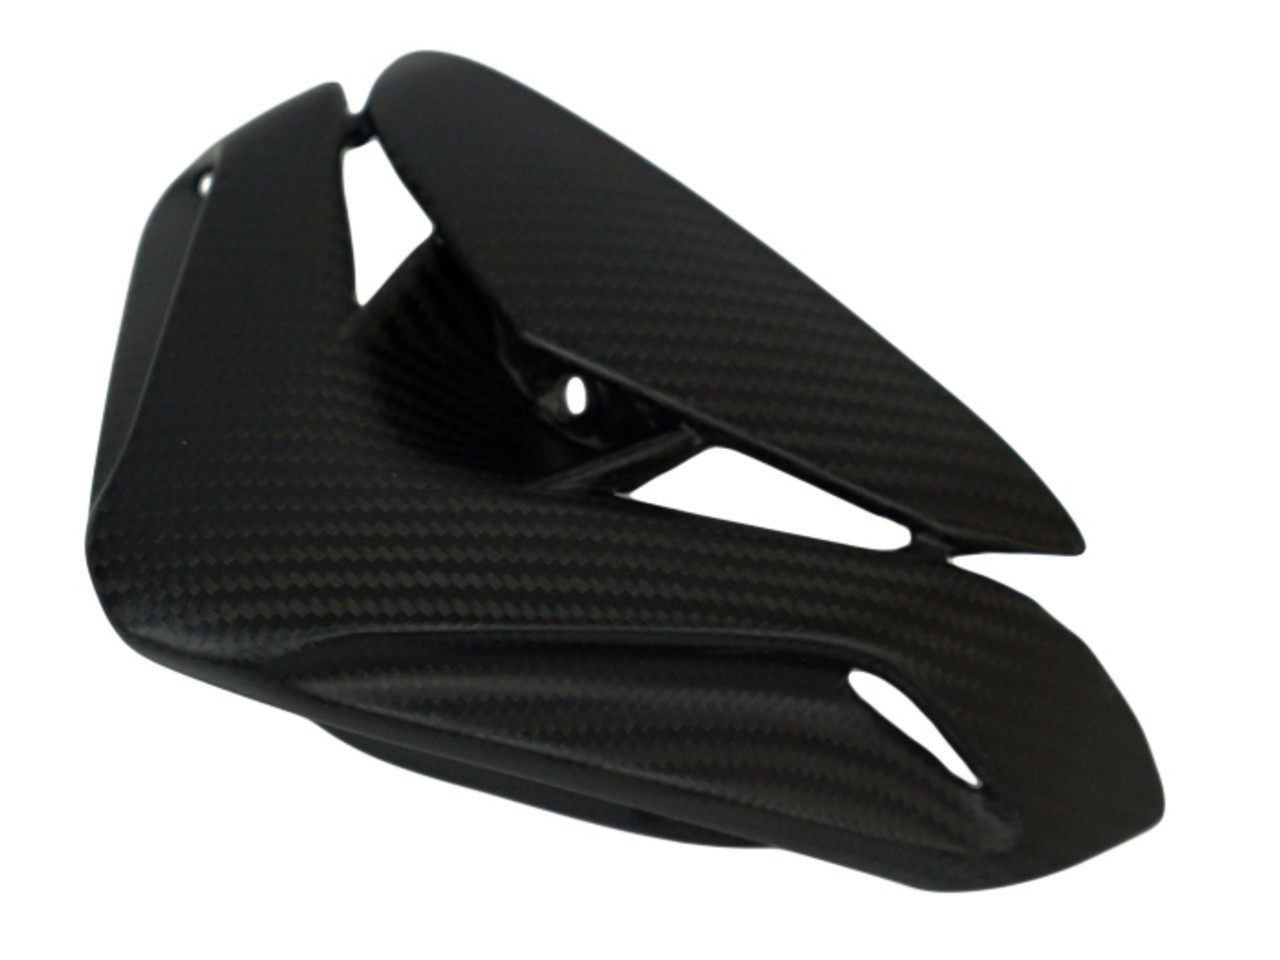 Cockpit Cover in Glossy Twill Weave Carbon Fiber for MV Agusta Brutale 800 2016+